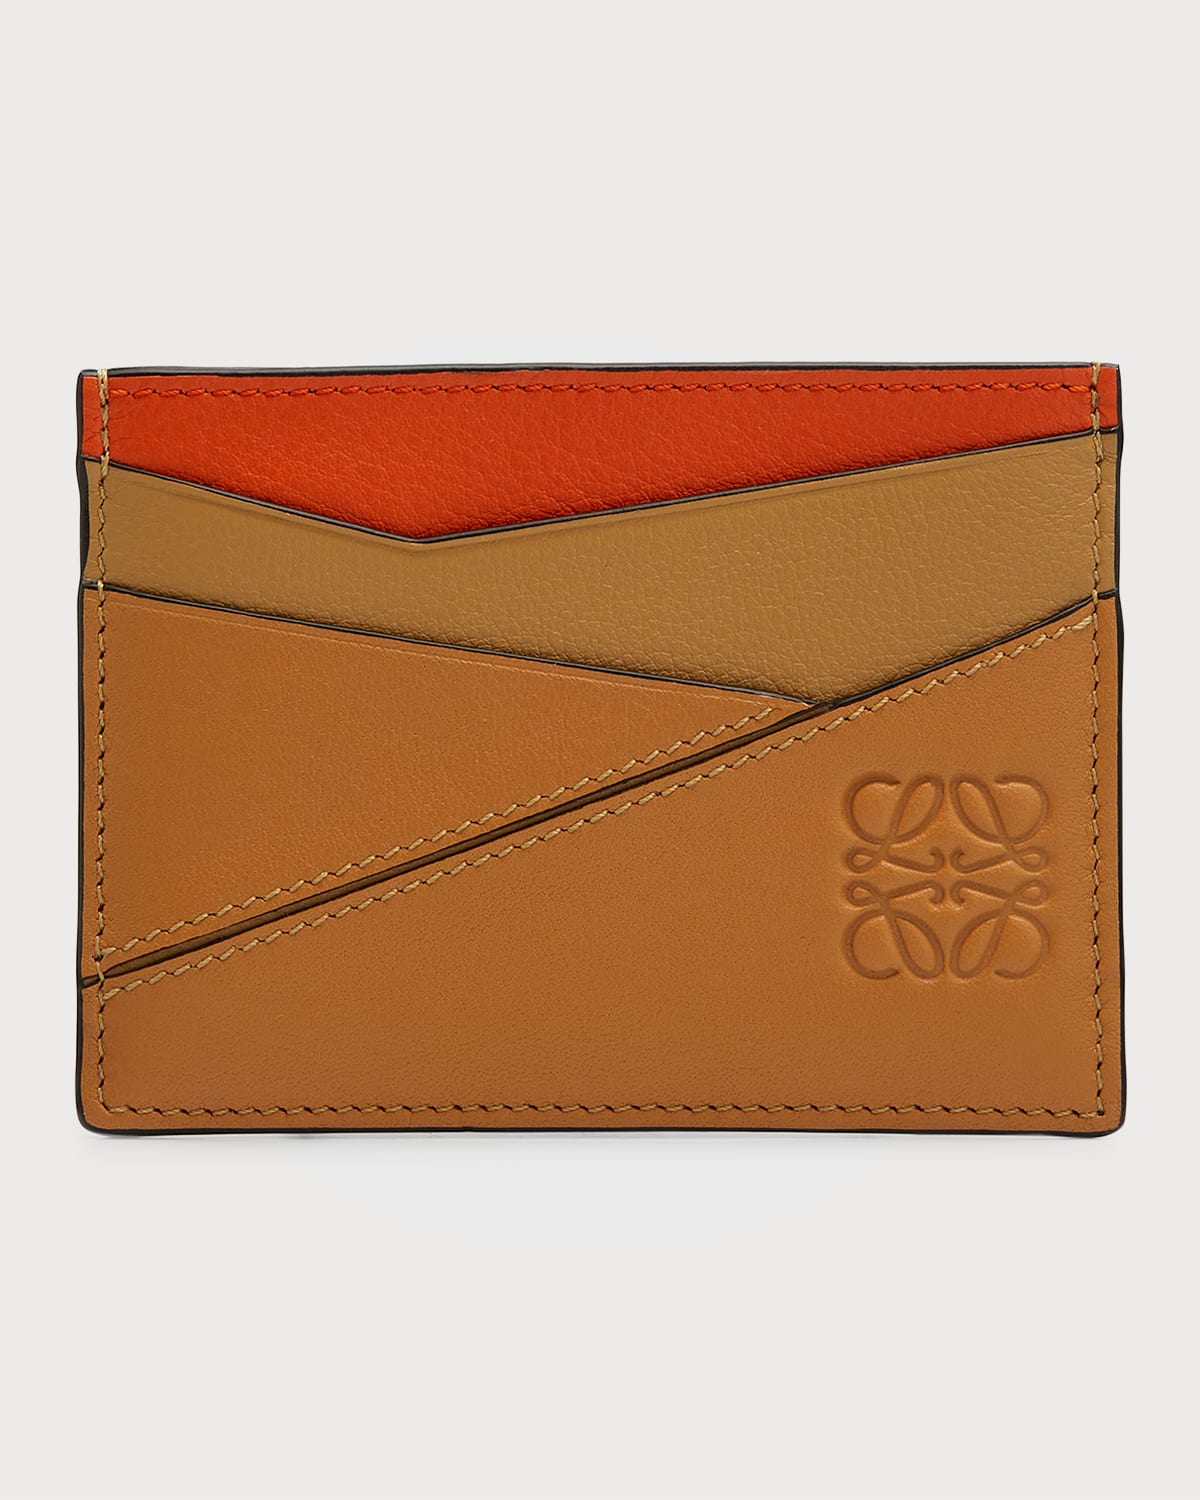 LOEWE MEN'S PUZZLE LEATHER CARD HOLDER